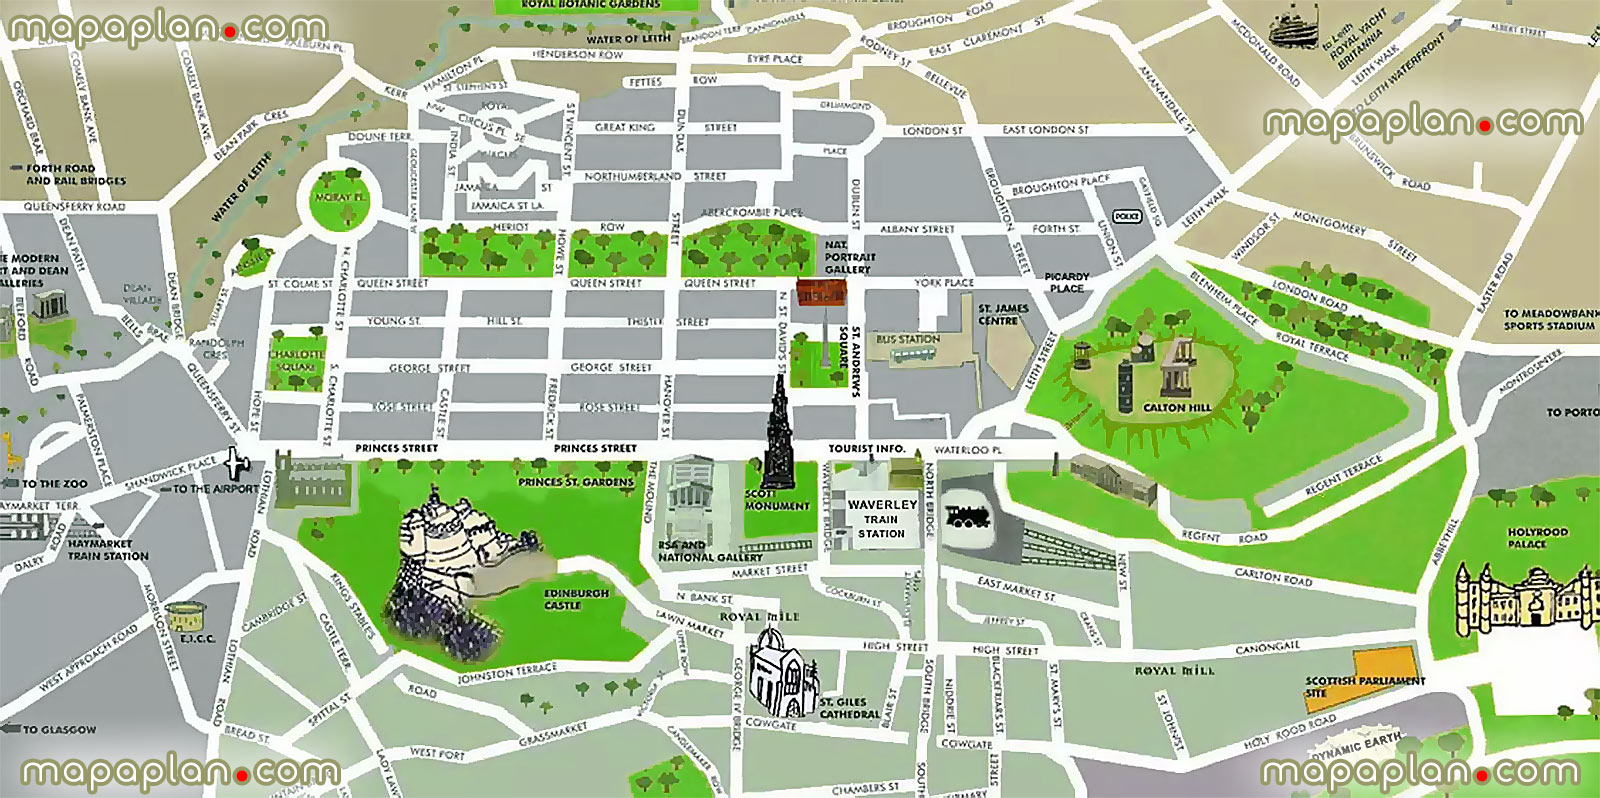 simple easy navigate 3d aerial graphical satellite view edinburgh inner city centre holiday top points interest central walkable sites city break historical places visit royal mile castle cathedrals Edinburgh Top tourist attractions map